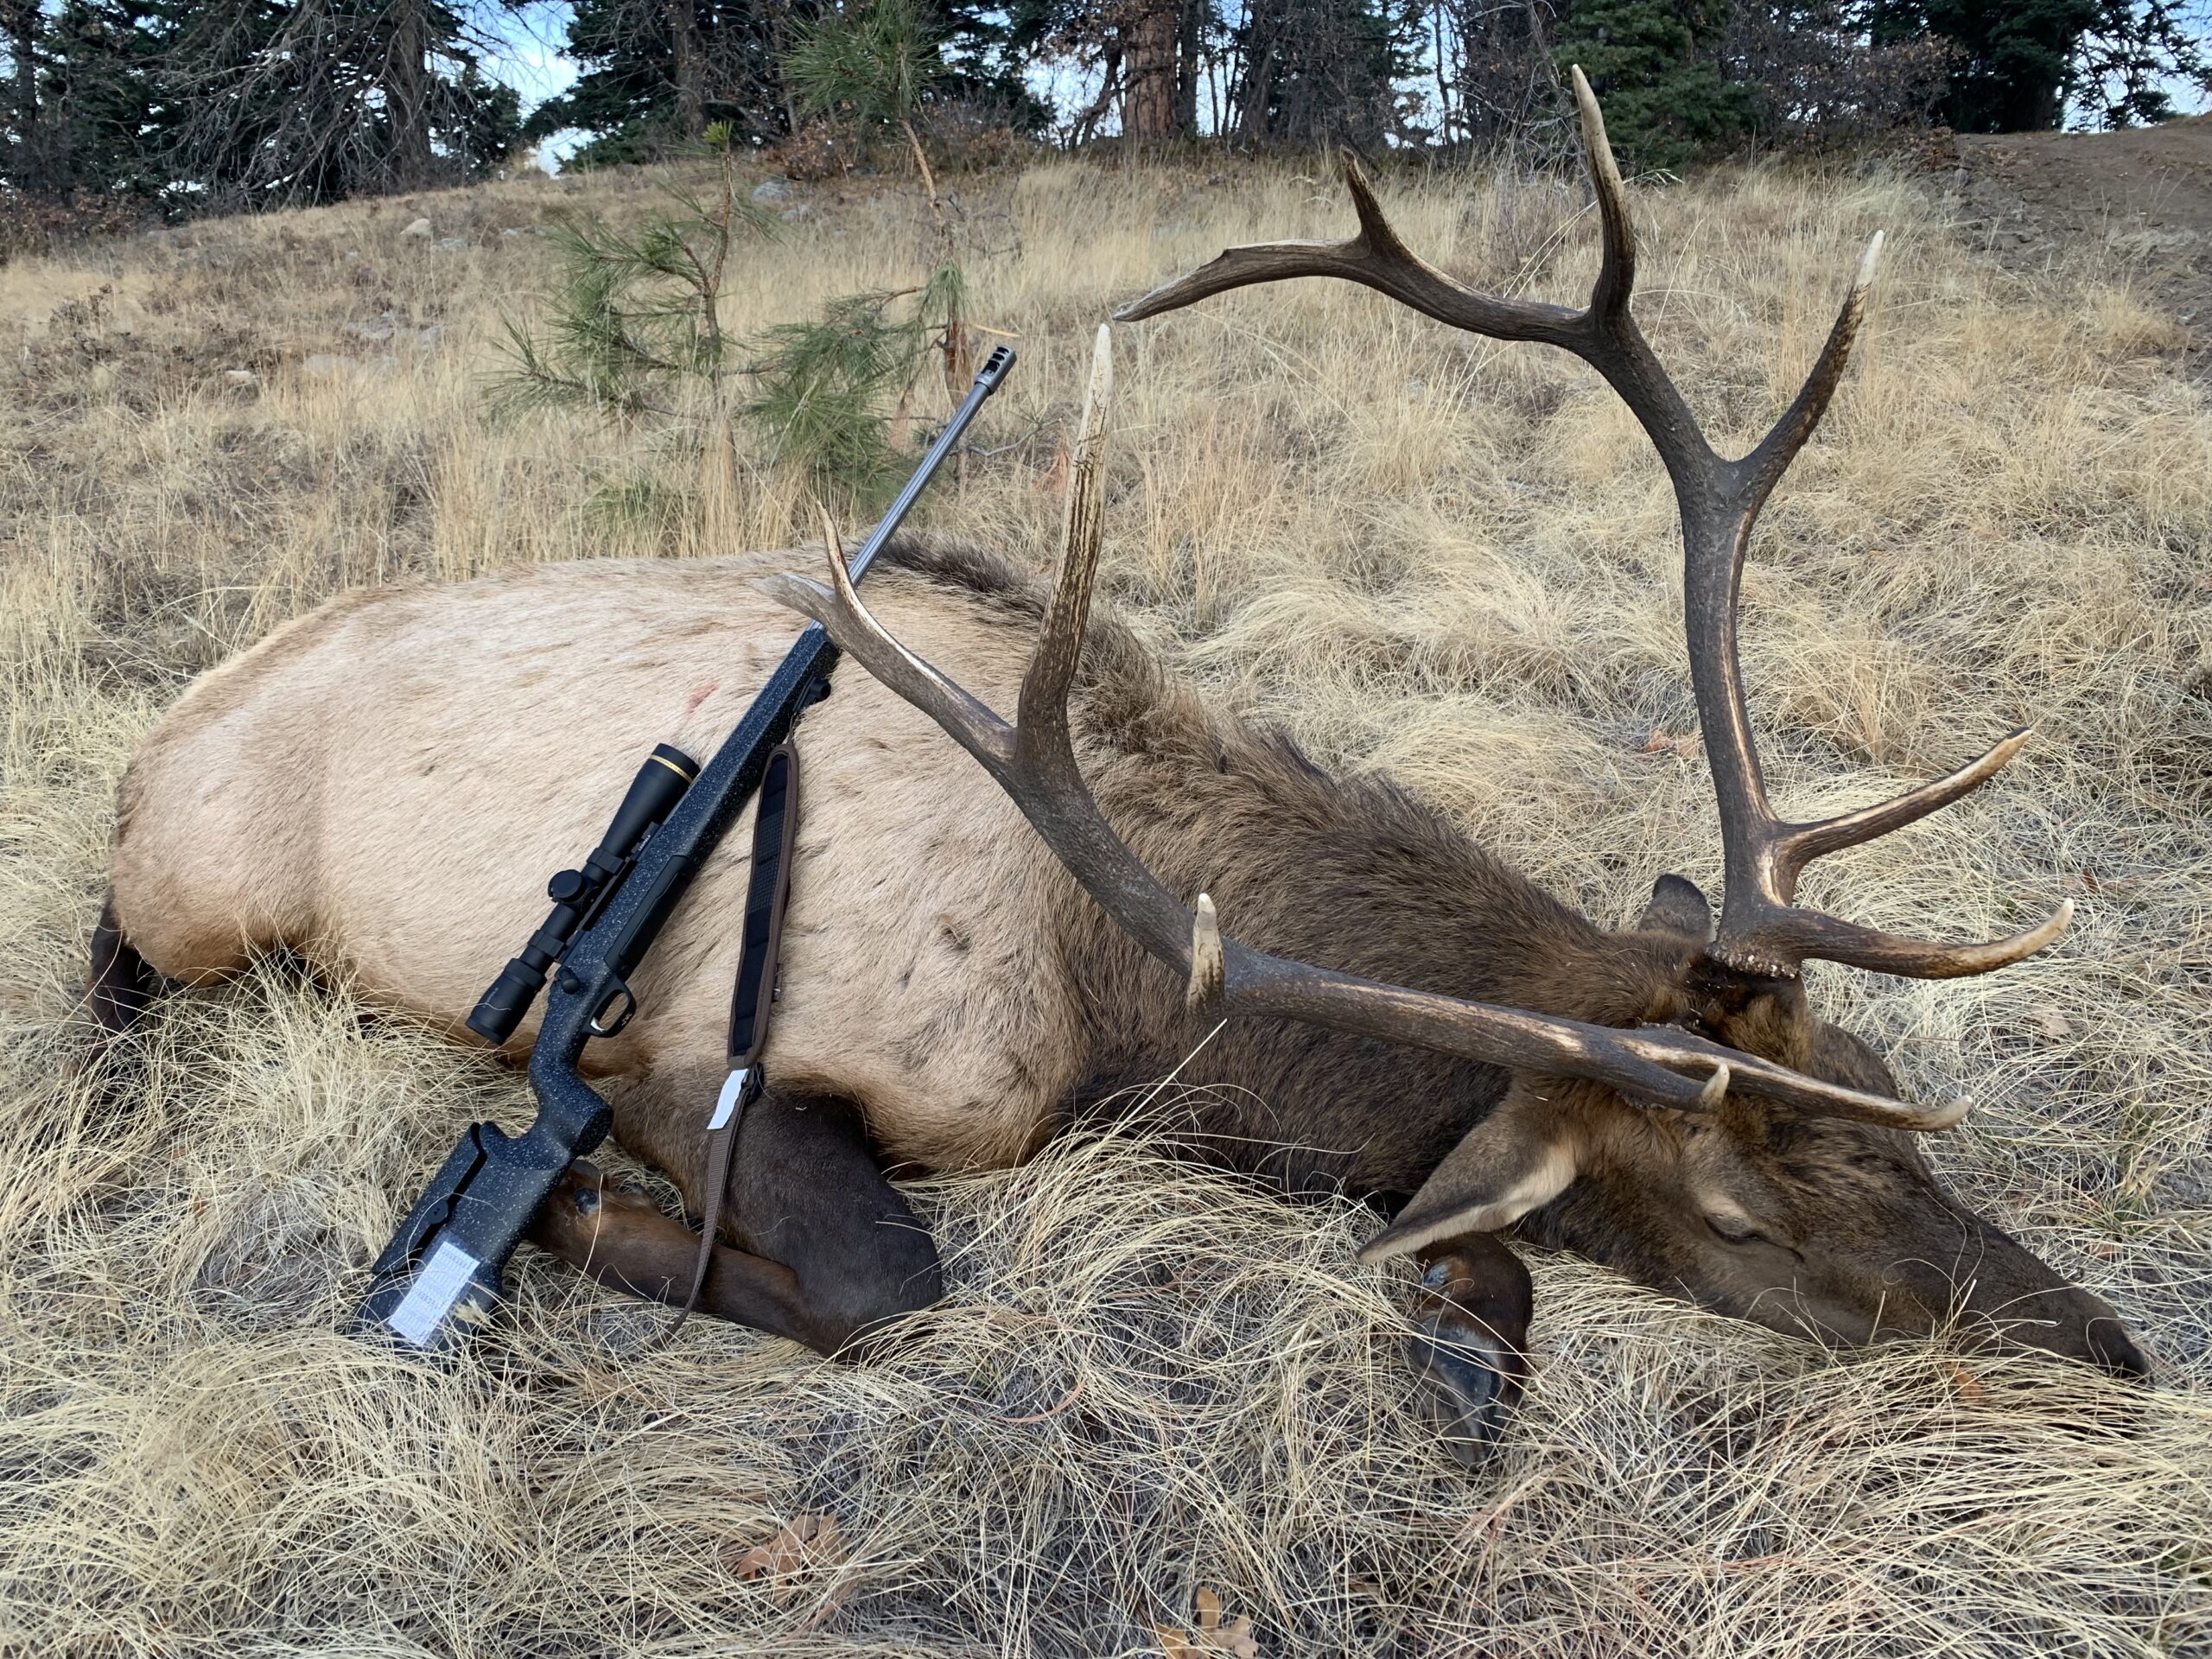 Bull elk and rifle with muzzle brake